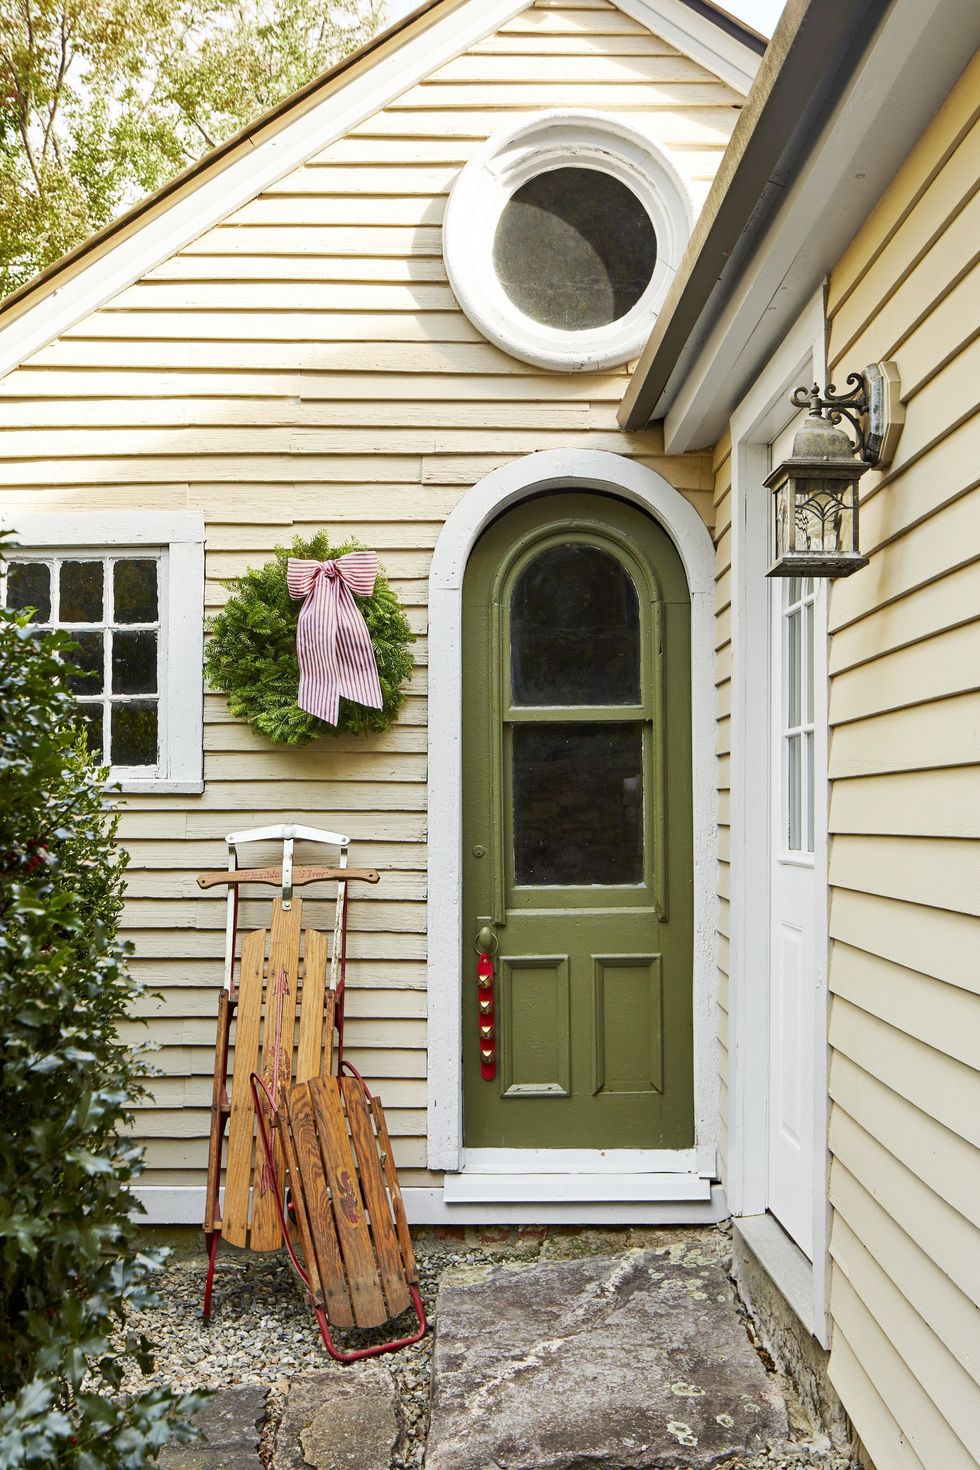 Front door with an antique sleigh, a simple wreath with striped ribbons and a green door decorated with jingle bells